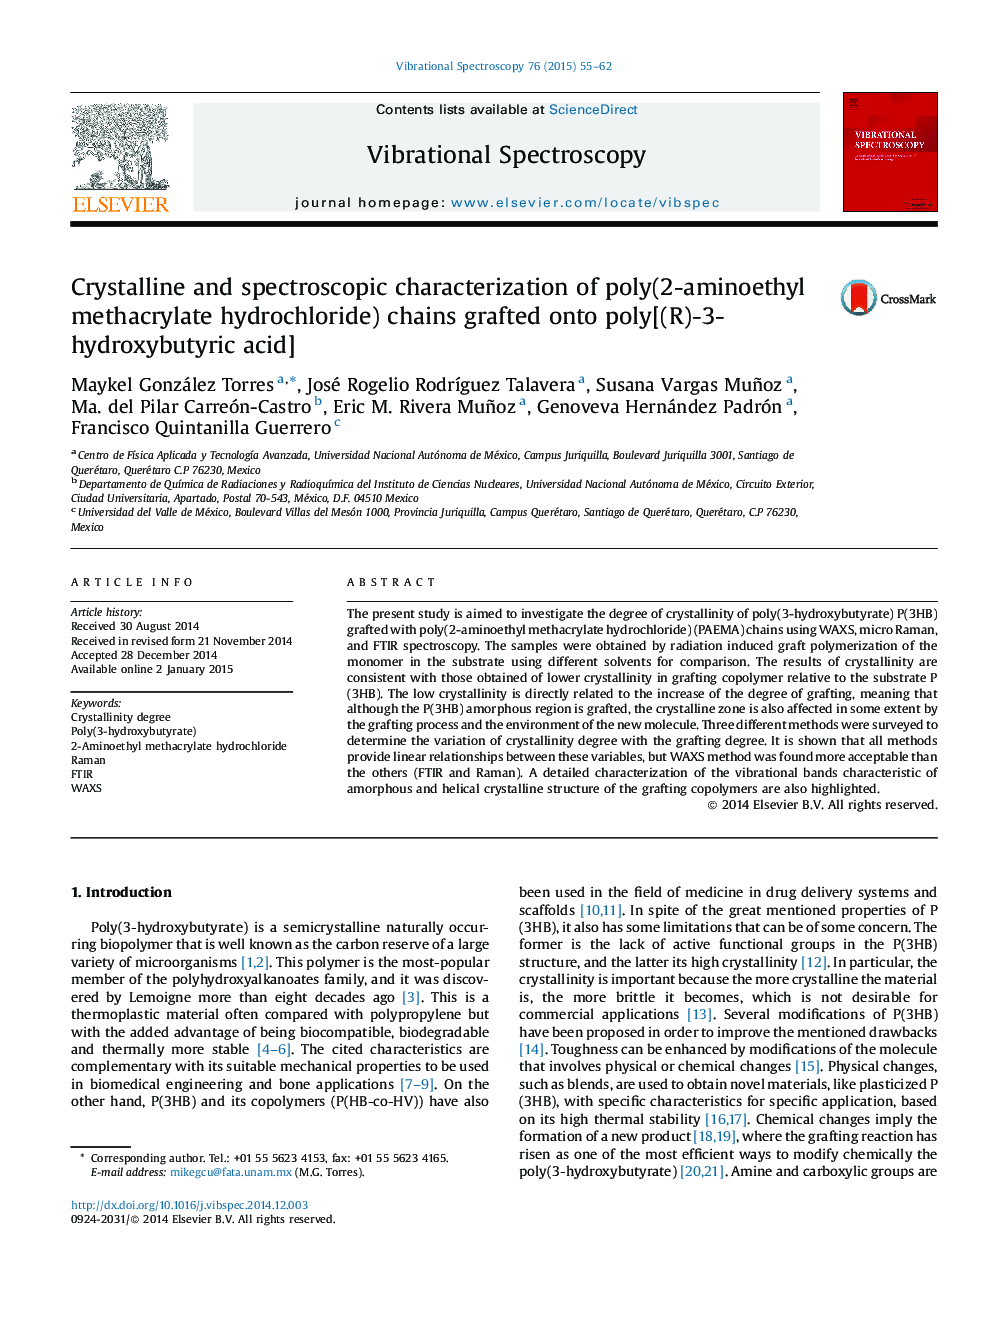 Crystalline and spectroscopic characterization of poly(2-aminoethyl methacrylate hydrochloride) chains grafted onto poly[(R)-3-hydroxybutyric acid]